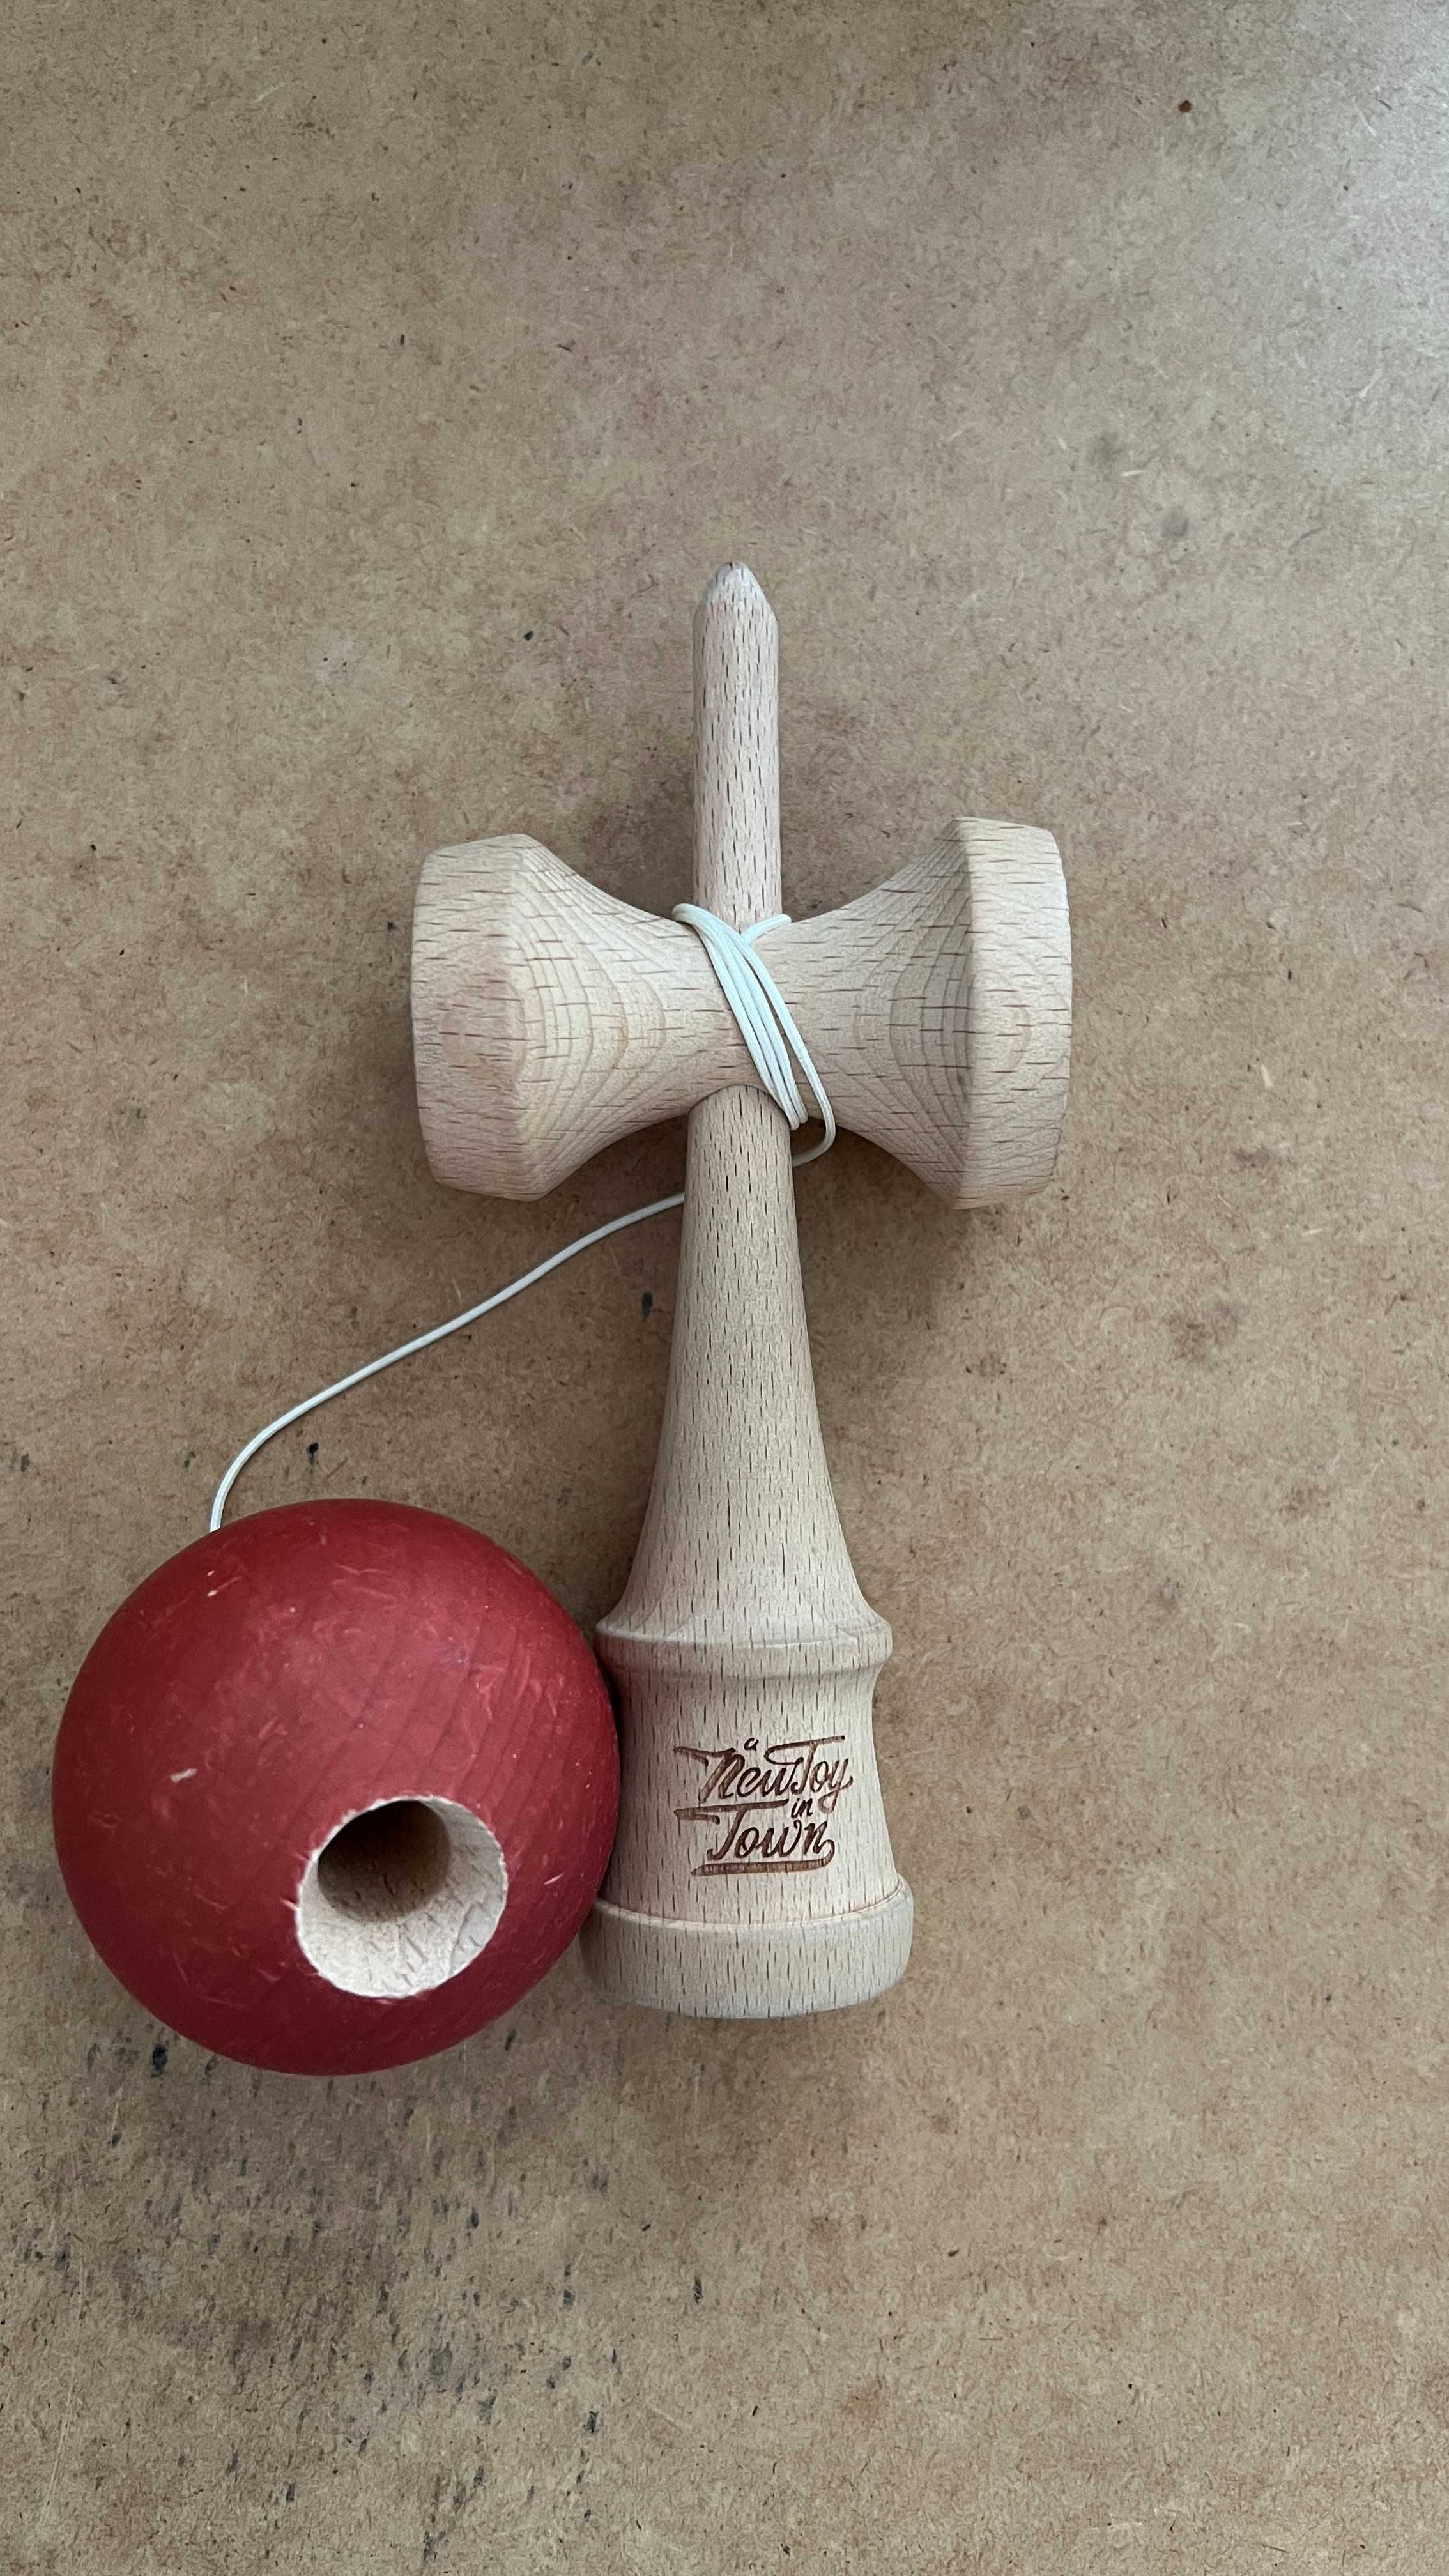 Kendama - A New Toy In Town